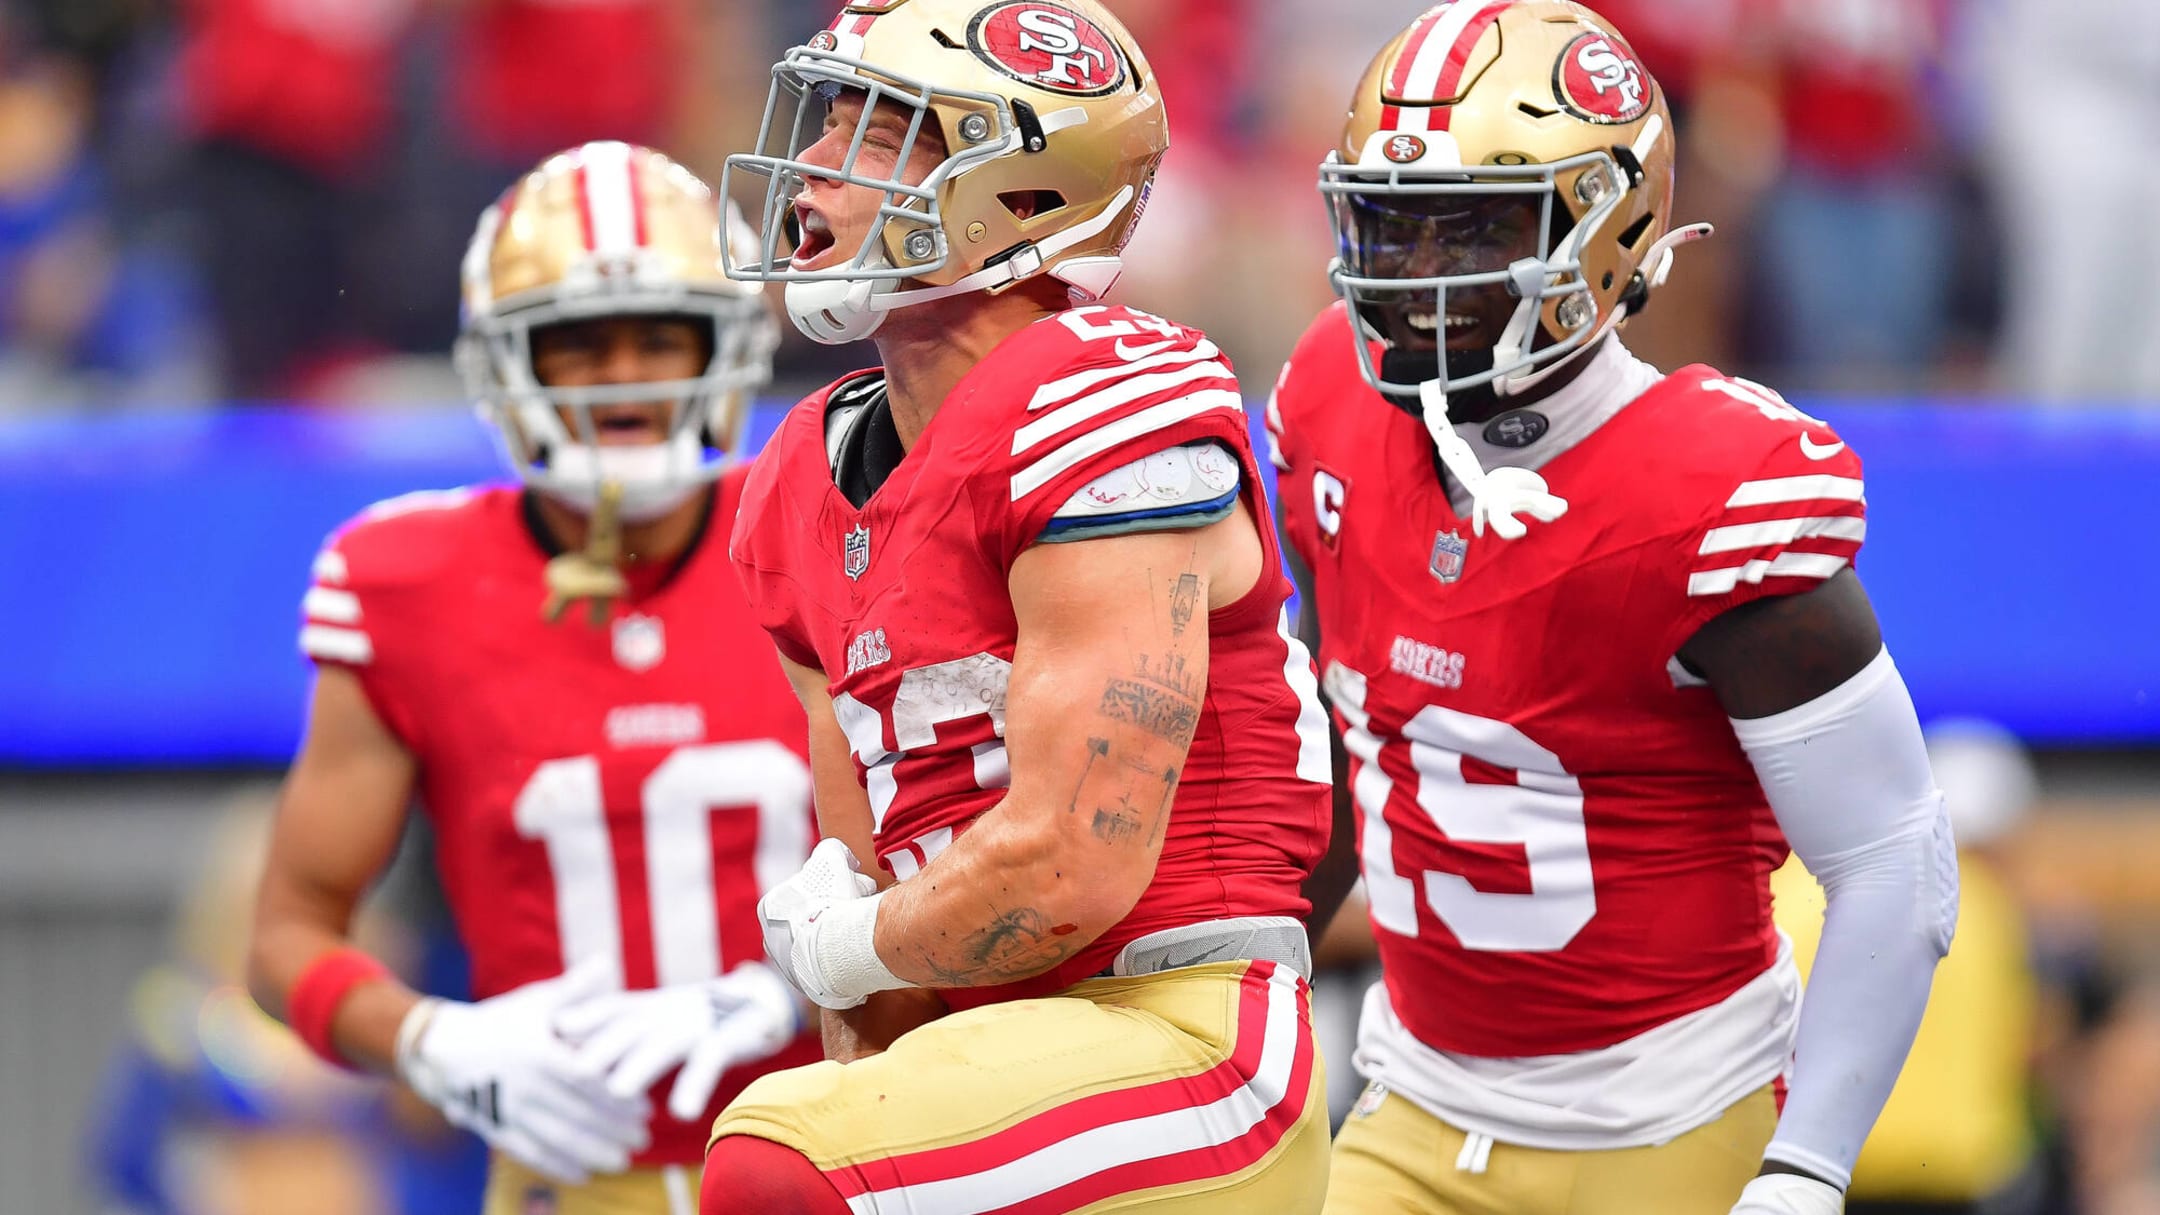 Raiders-49ers TNF Betting Preview: Which One-Win Team Provides Value?